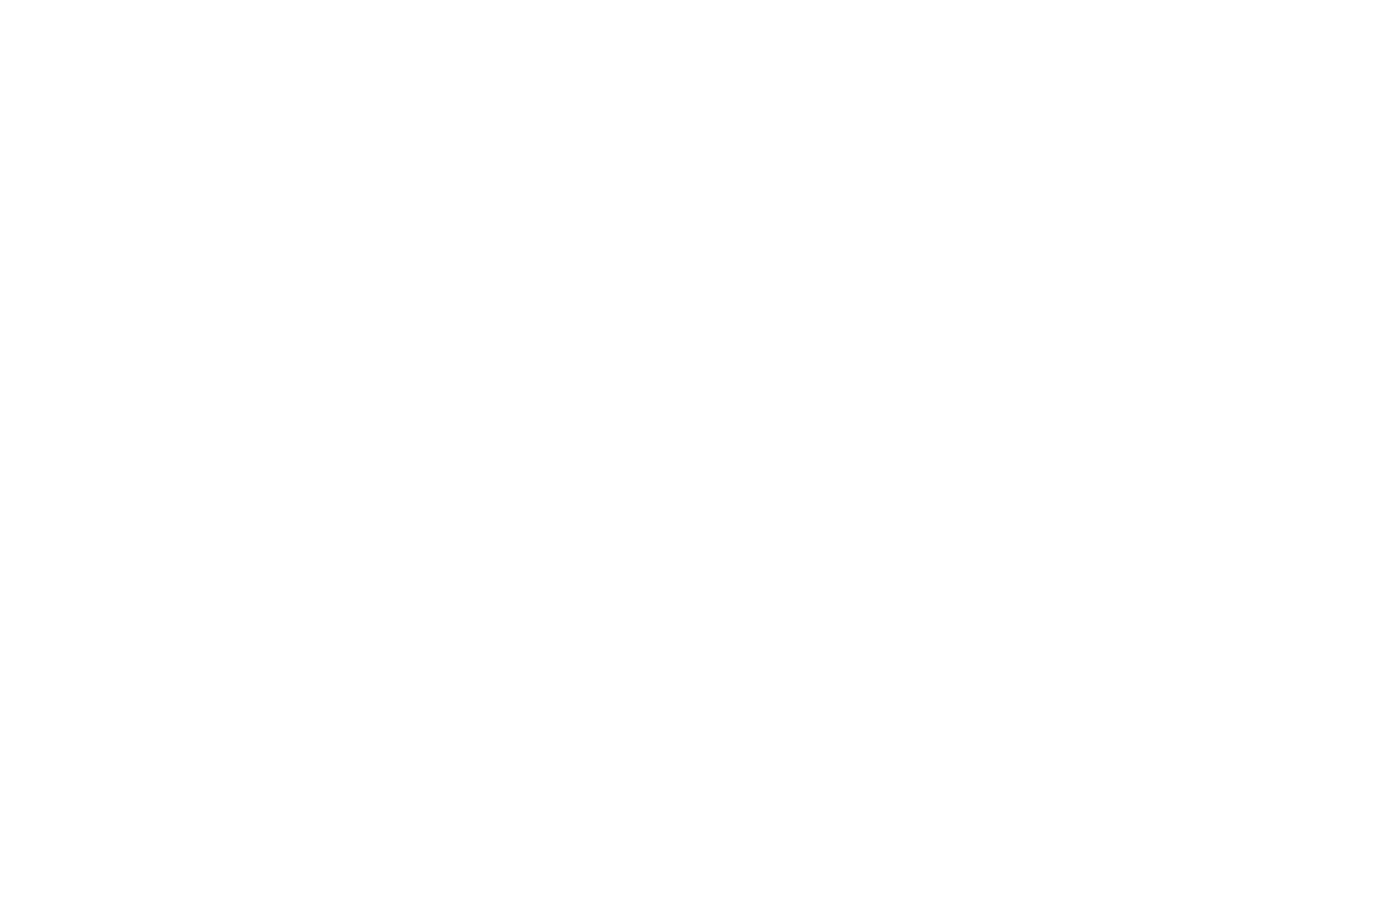 CA Logos_Oxfam WHITE.png